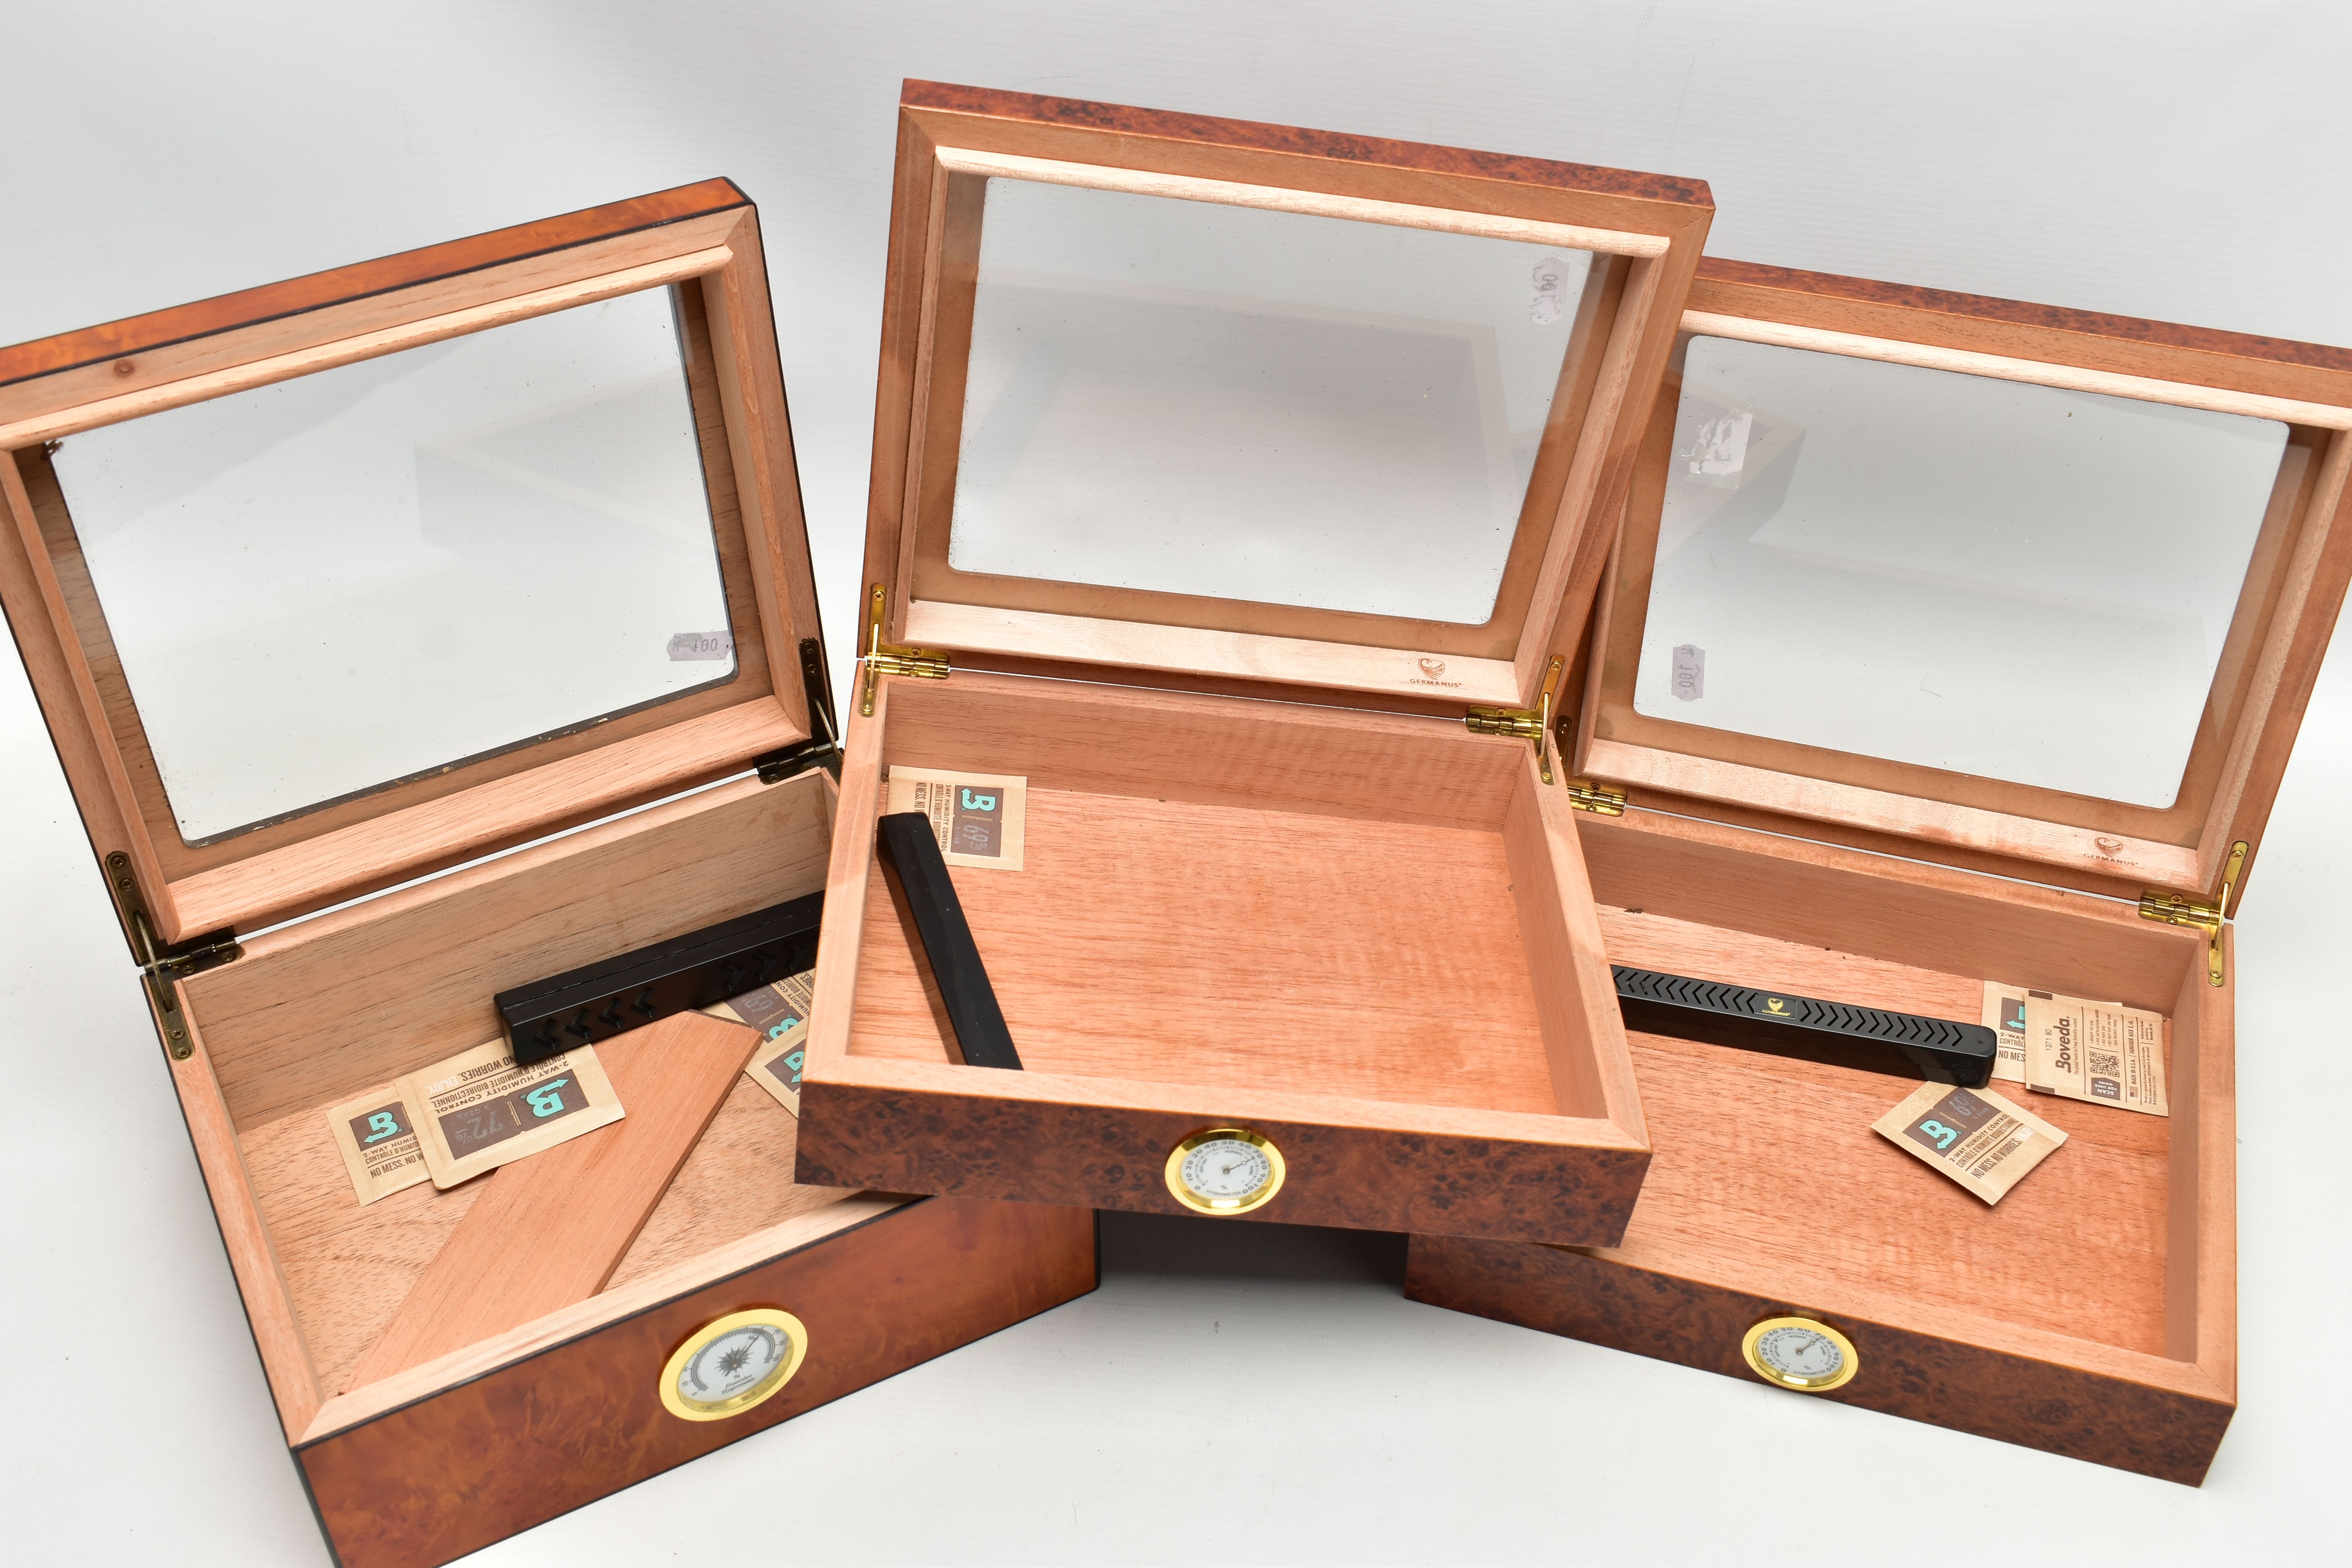 THREE 'GERMANUS' AMBOYNA CIGAR HUMIDOR BOXES, two shallow wooden boxes with an open top glass panel, - Image 3 of 4